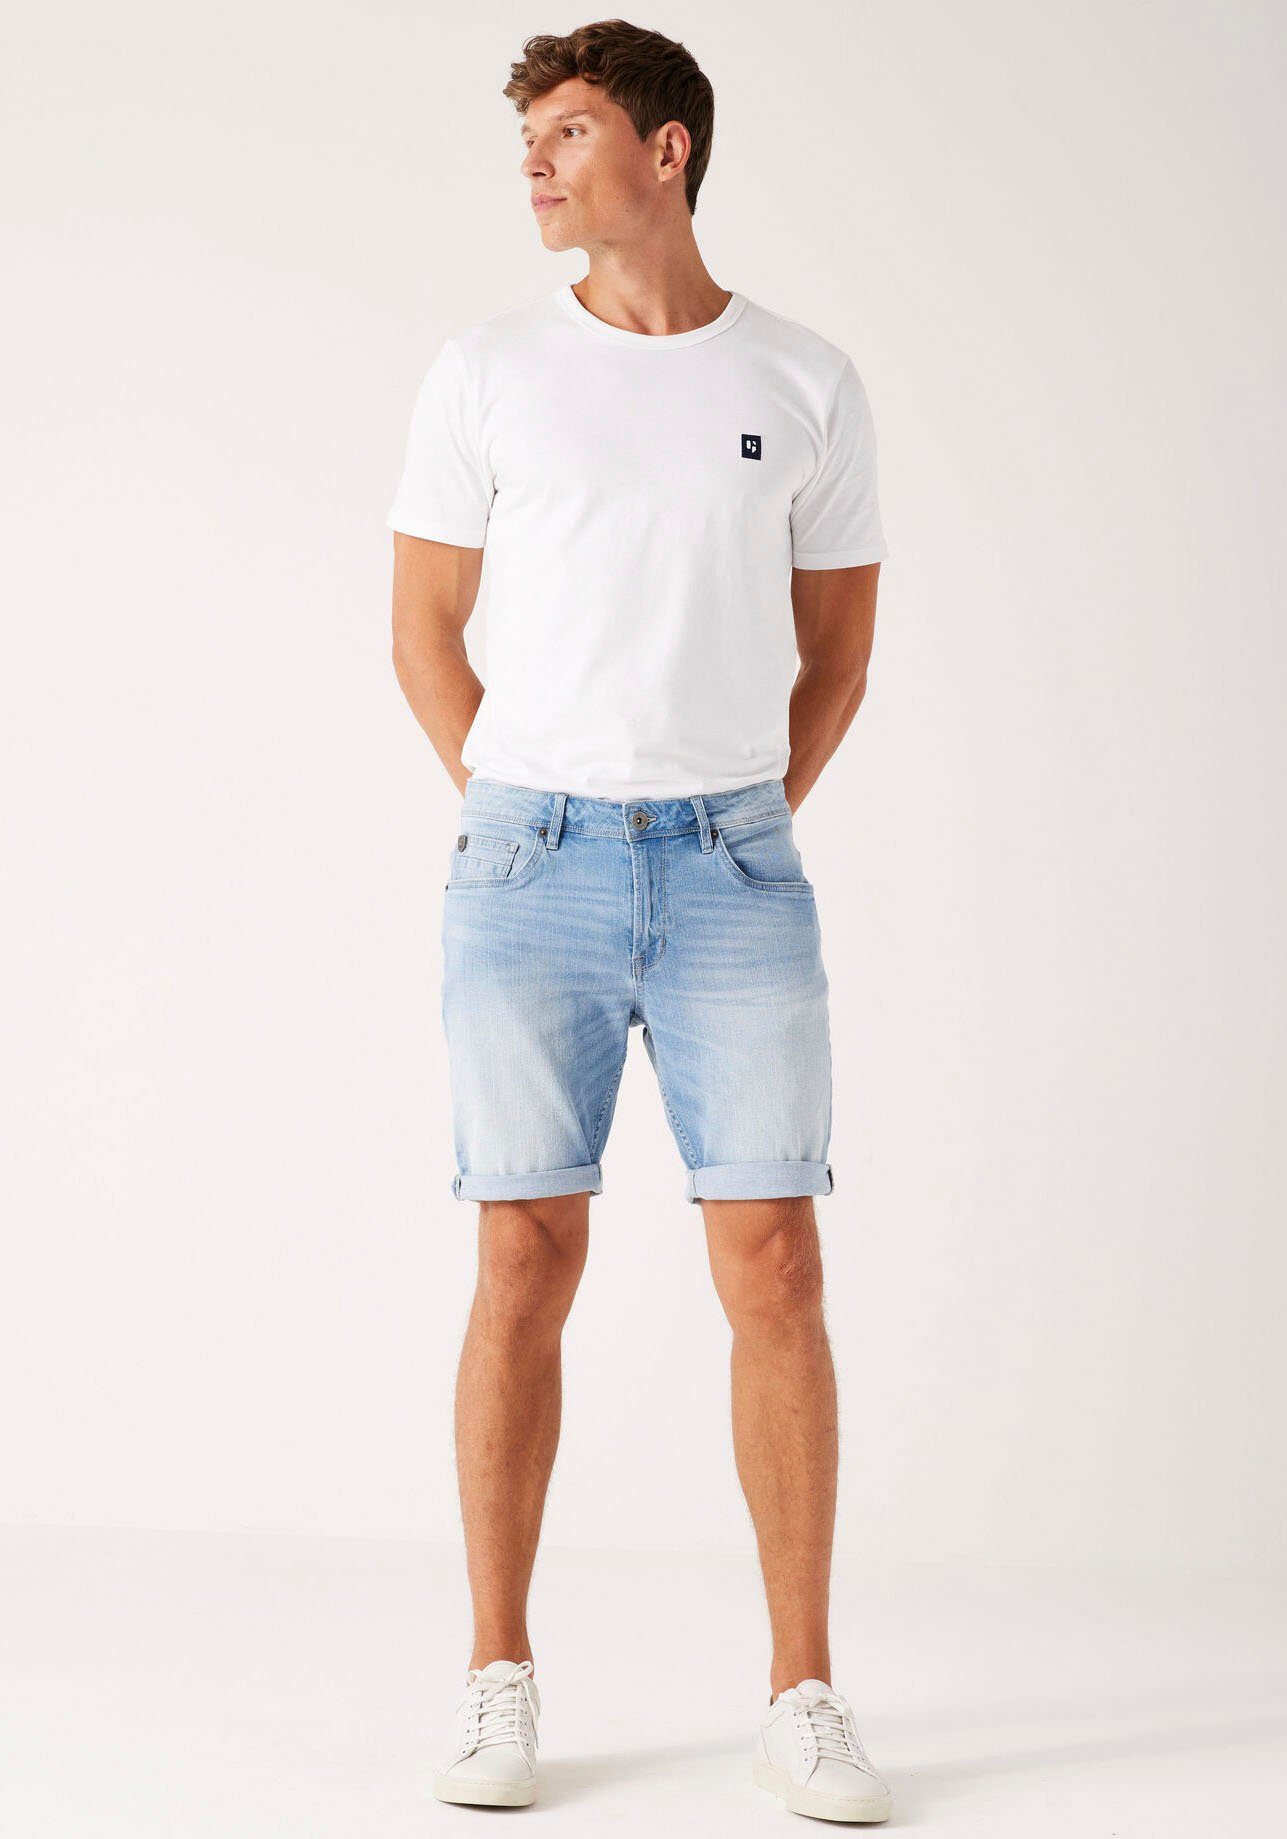 Garcia Jeansshorts Russo light used